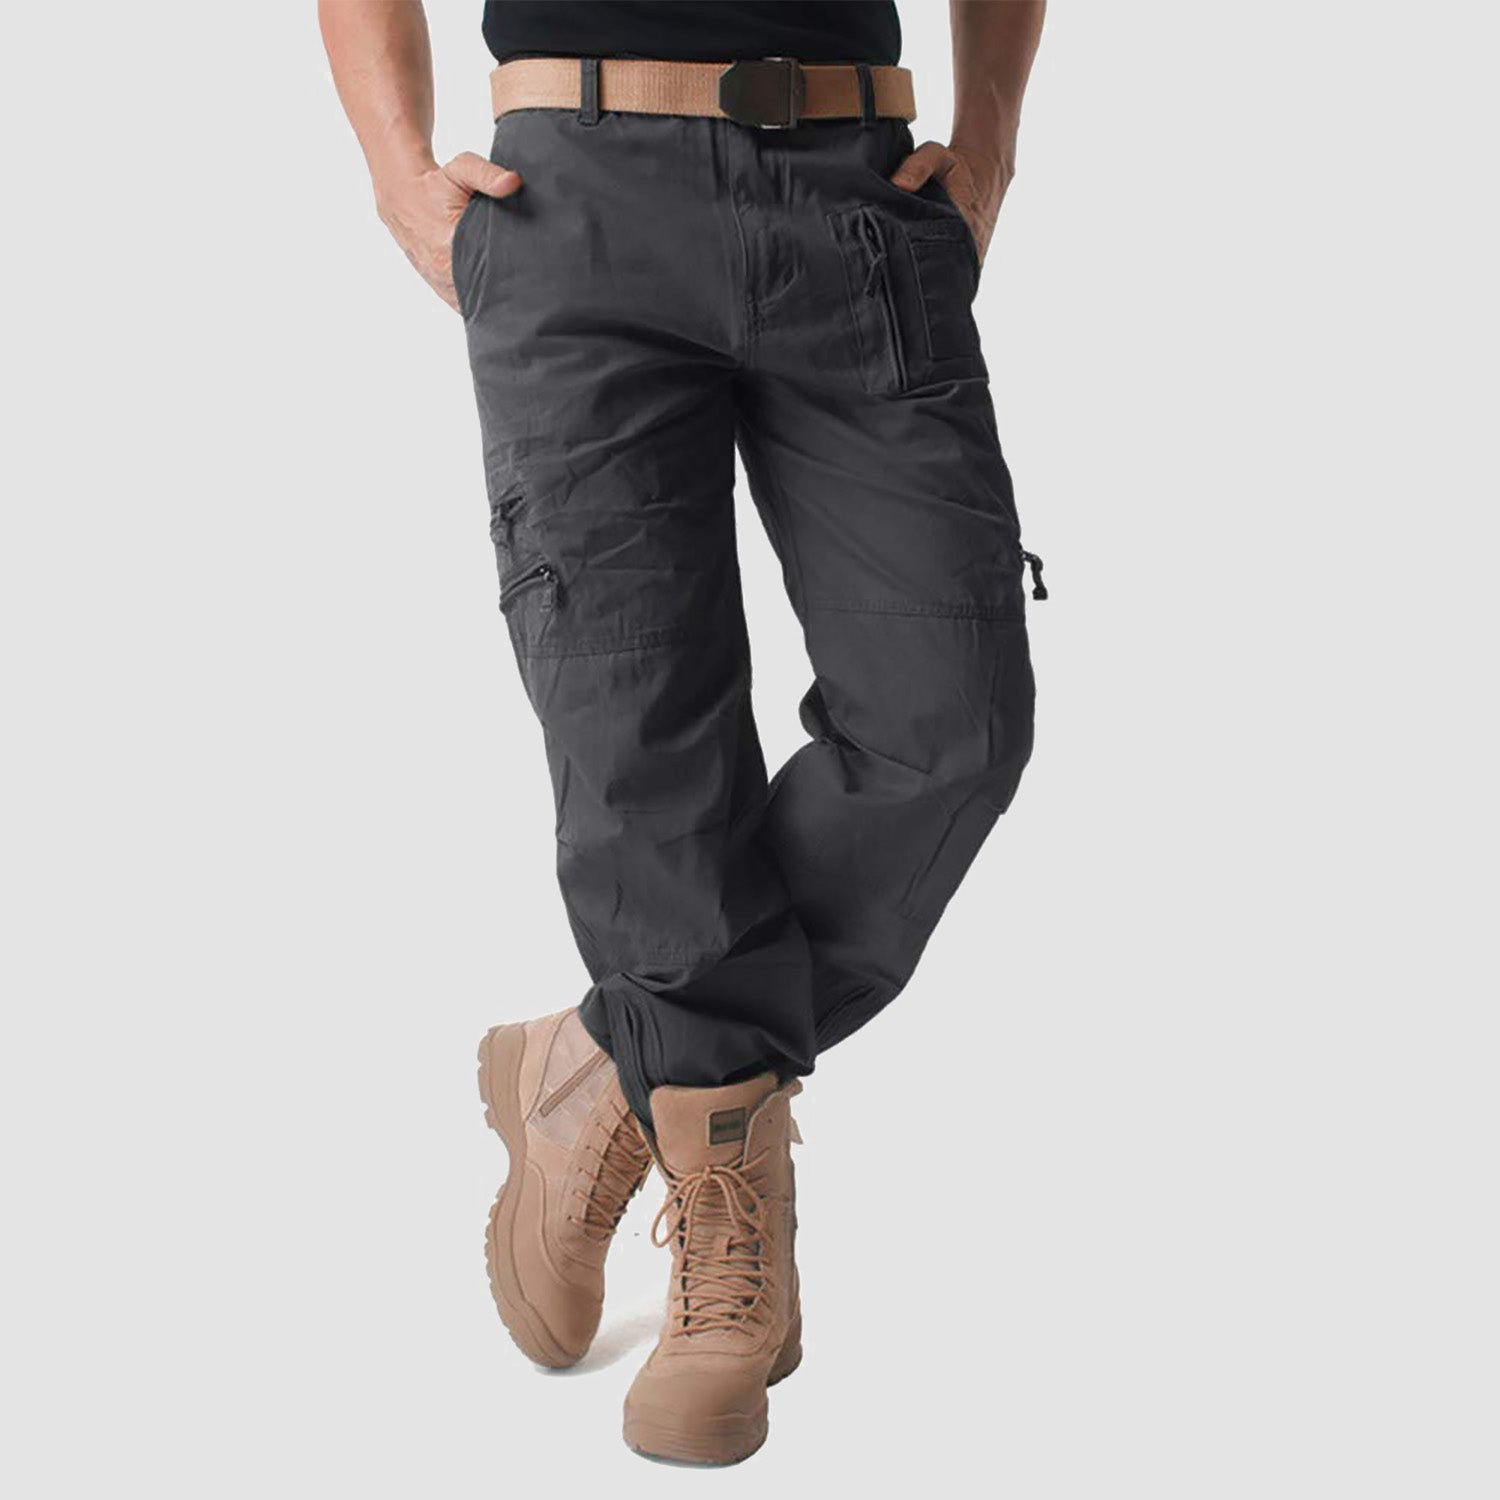 Men's Tactical Pants with 9 Pockets Ripstop Cargo Pants